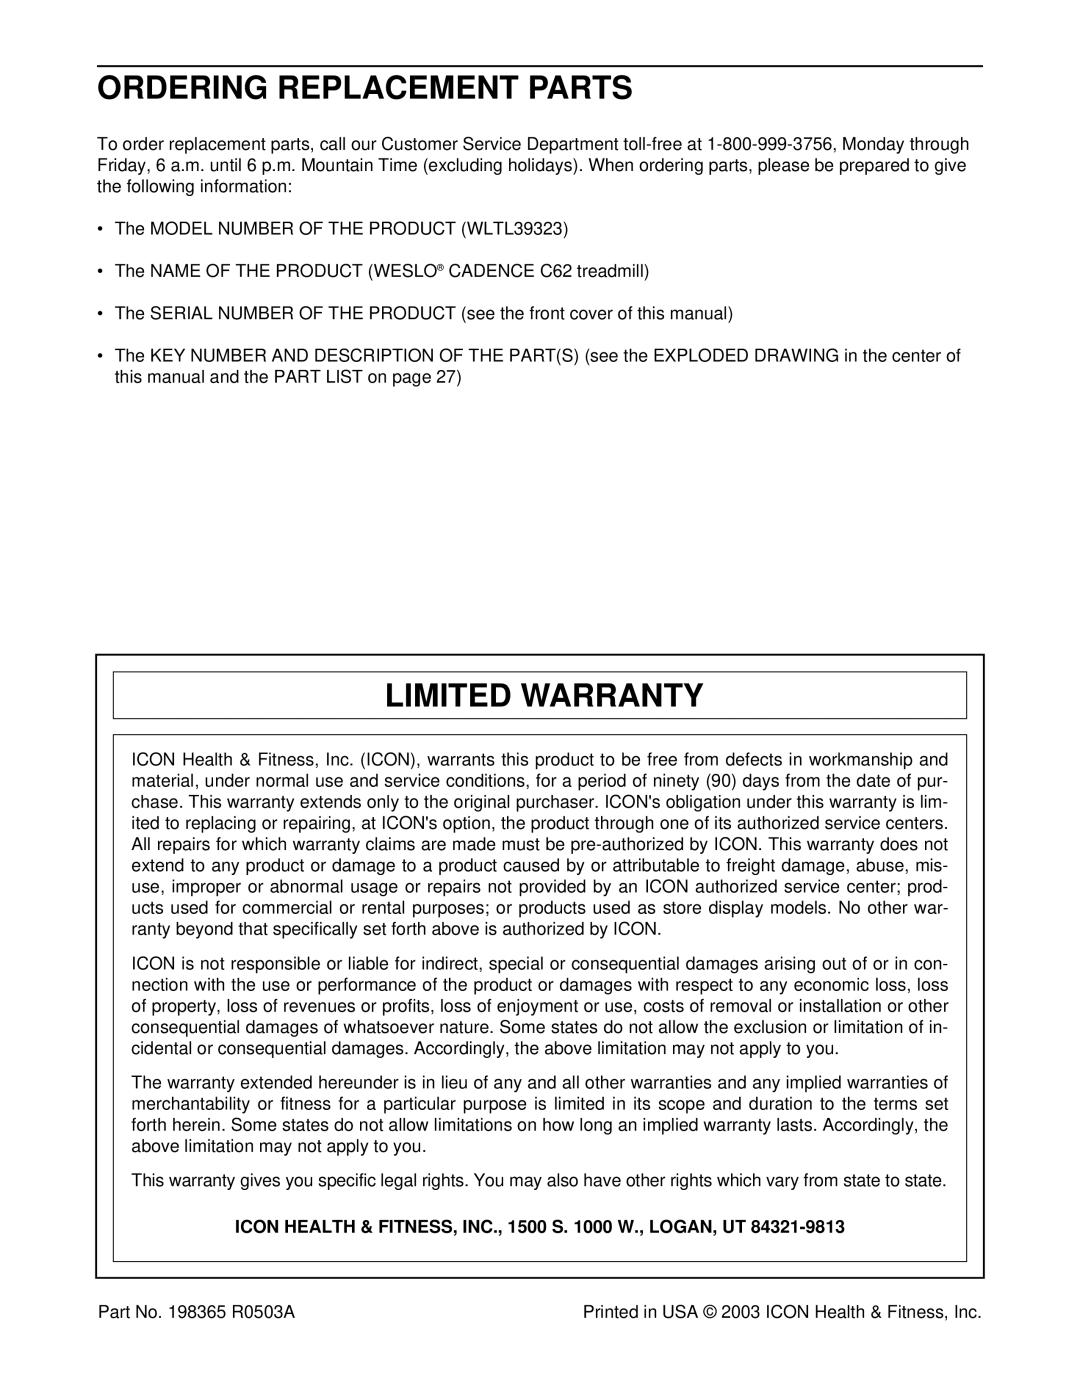 Weslo WLTL39323 user manual Ordering Replacement Parts, Limited Warranty, Icon Health & FITNESS, INC., 1500 S W., LOGAN, UT 